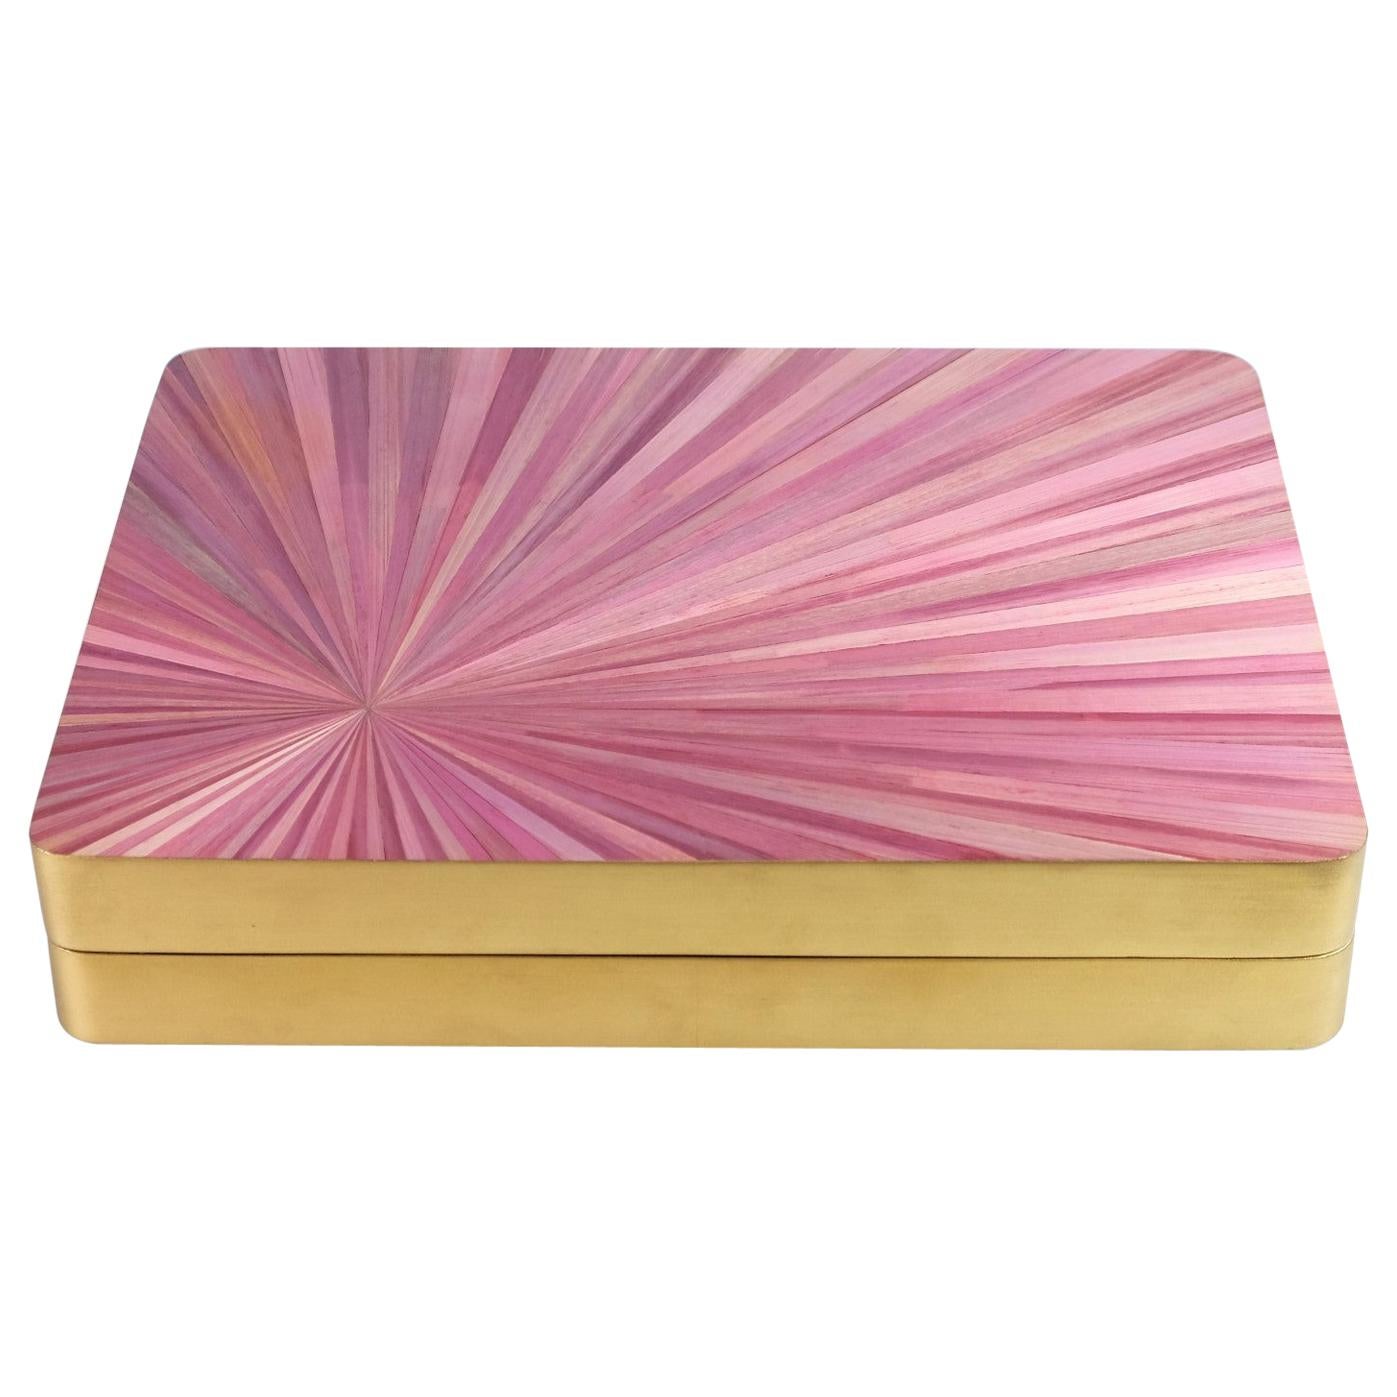 Large Rectangular Brass Box with a Pink Straw Marquetry Lid by Ginger Brown